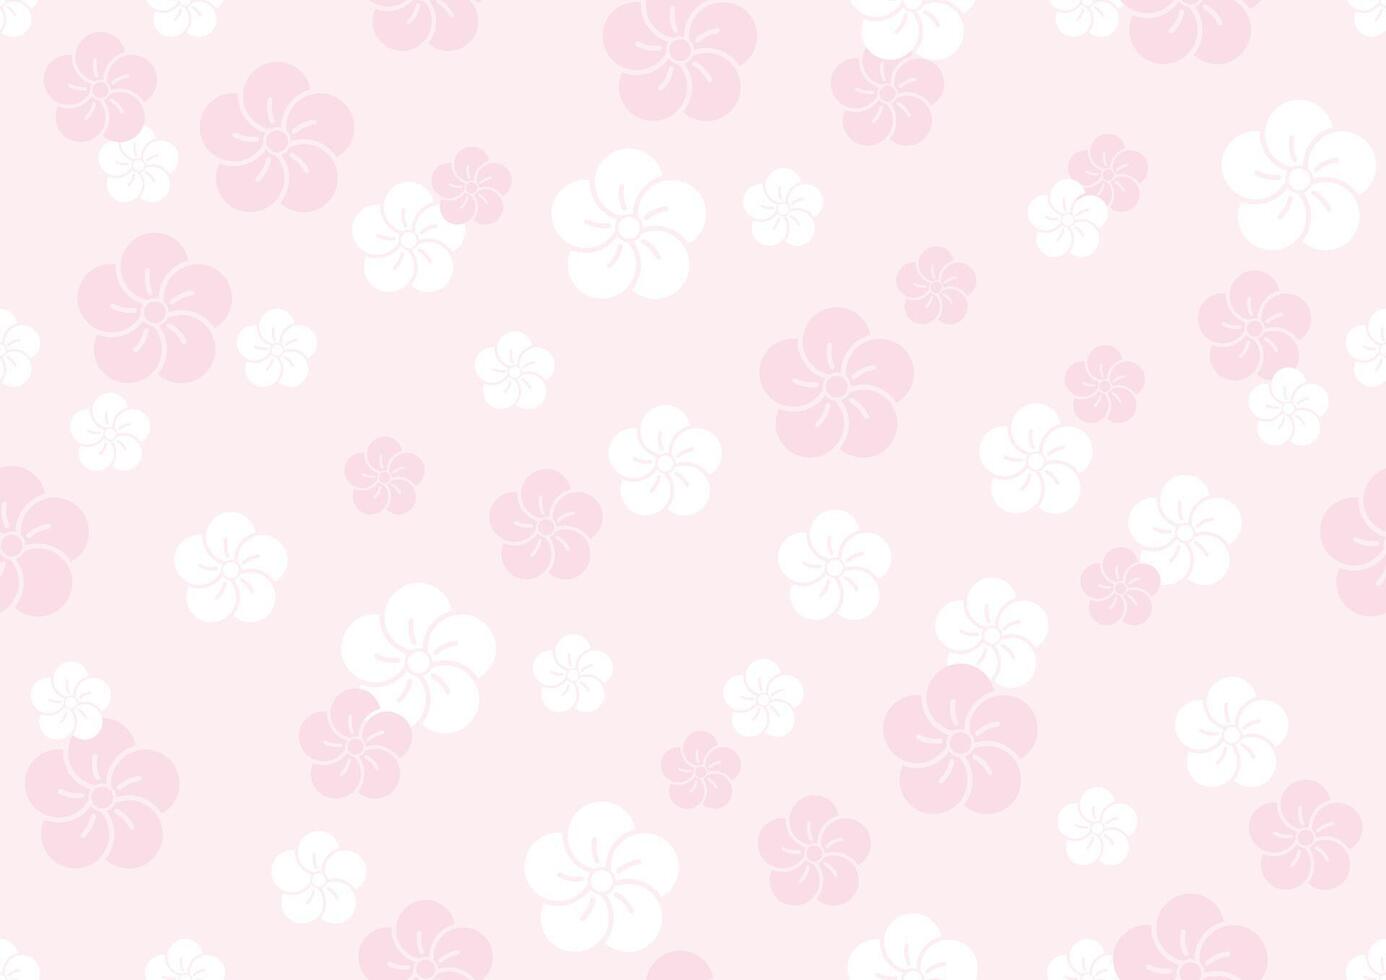 Horizontally And Vertically Repeatable Vector Seamless Pattern With Japanese Vintage Plum Flowers.